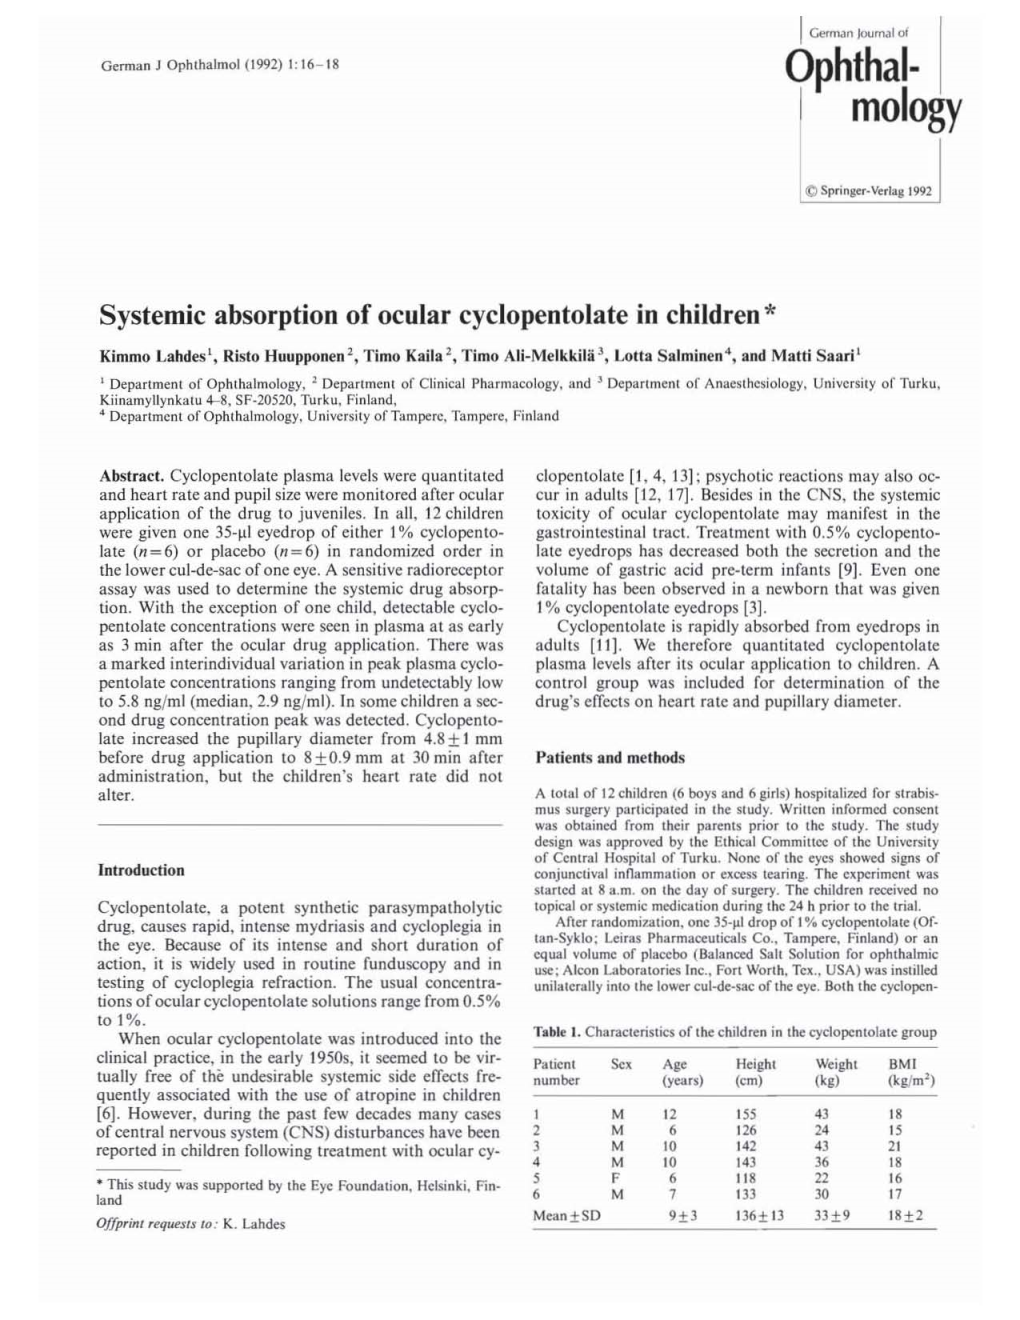 Systemic Absorption of Ocular Cyclopentolate in Children.Pdf